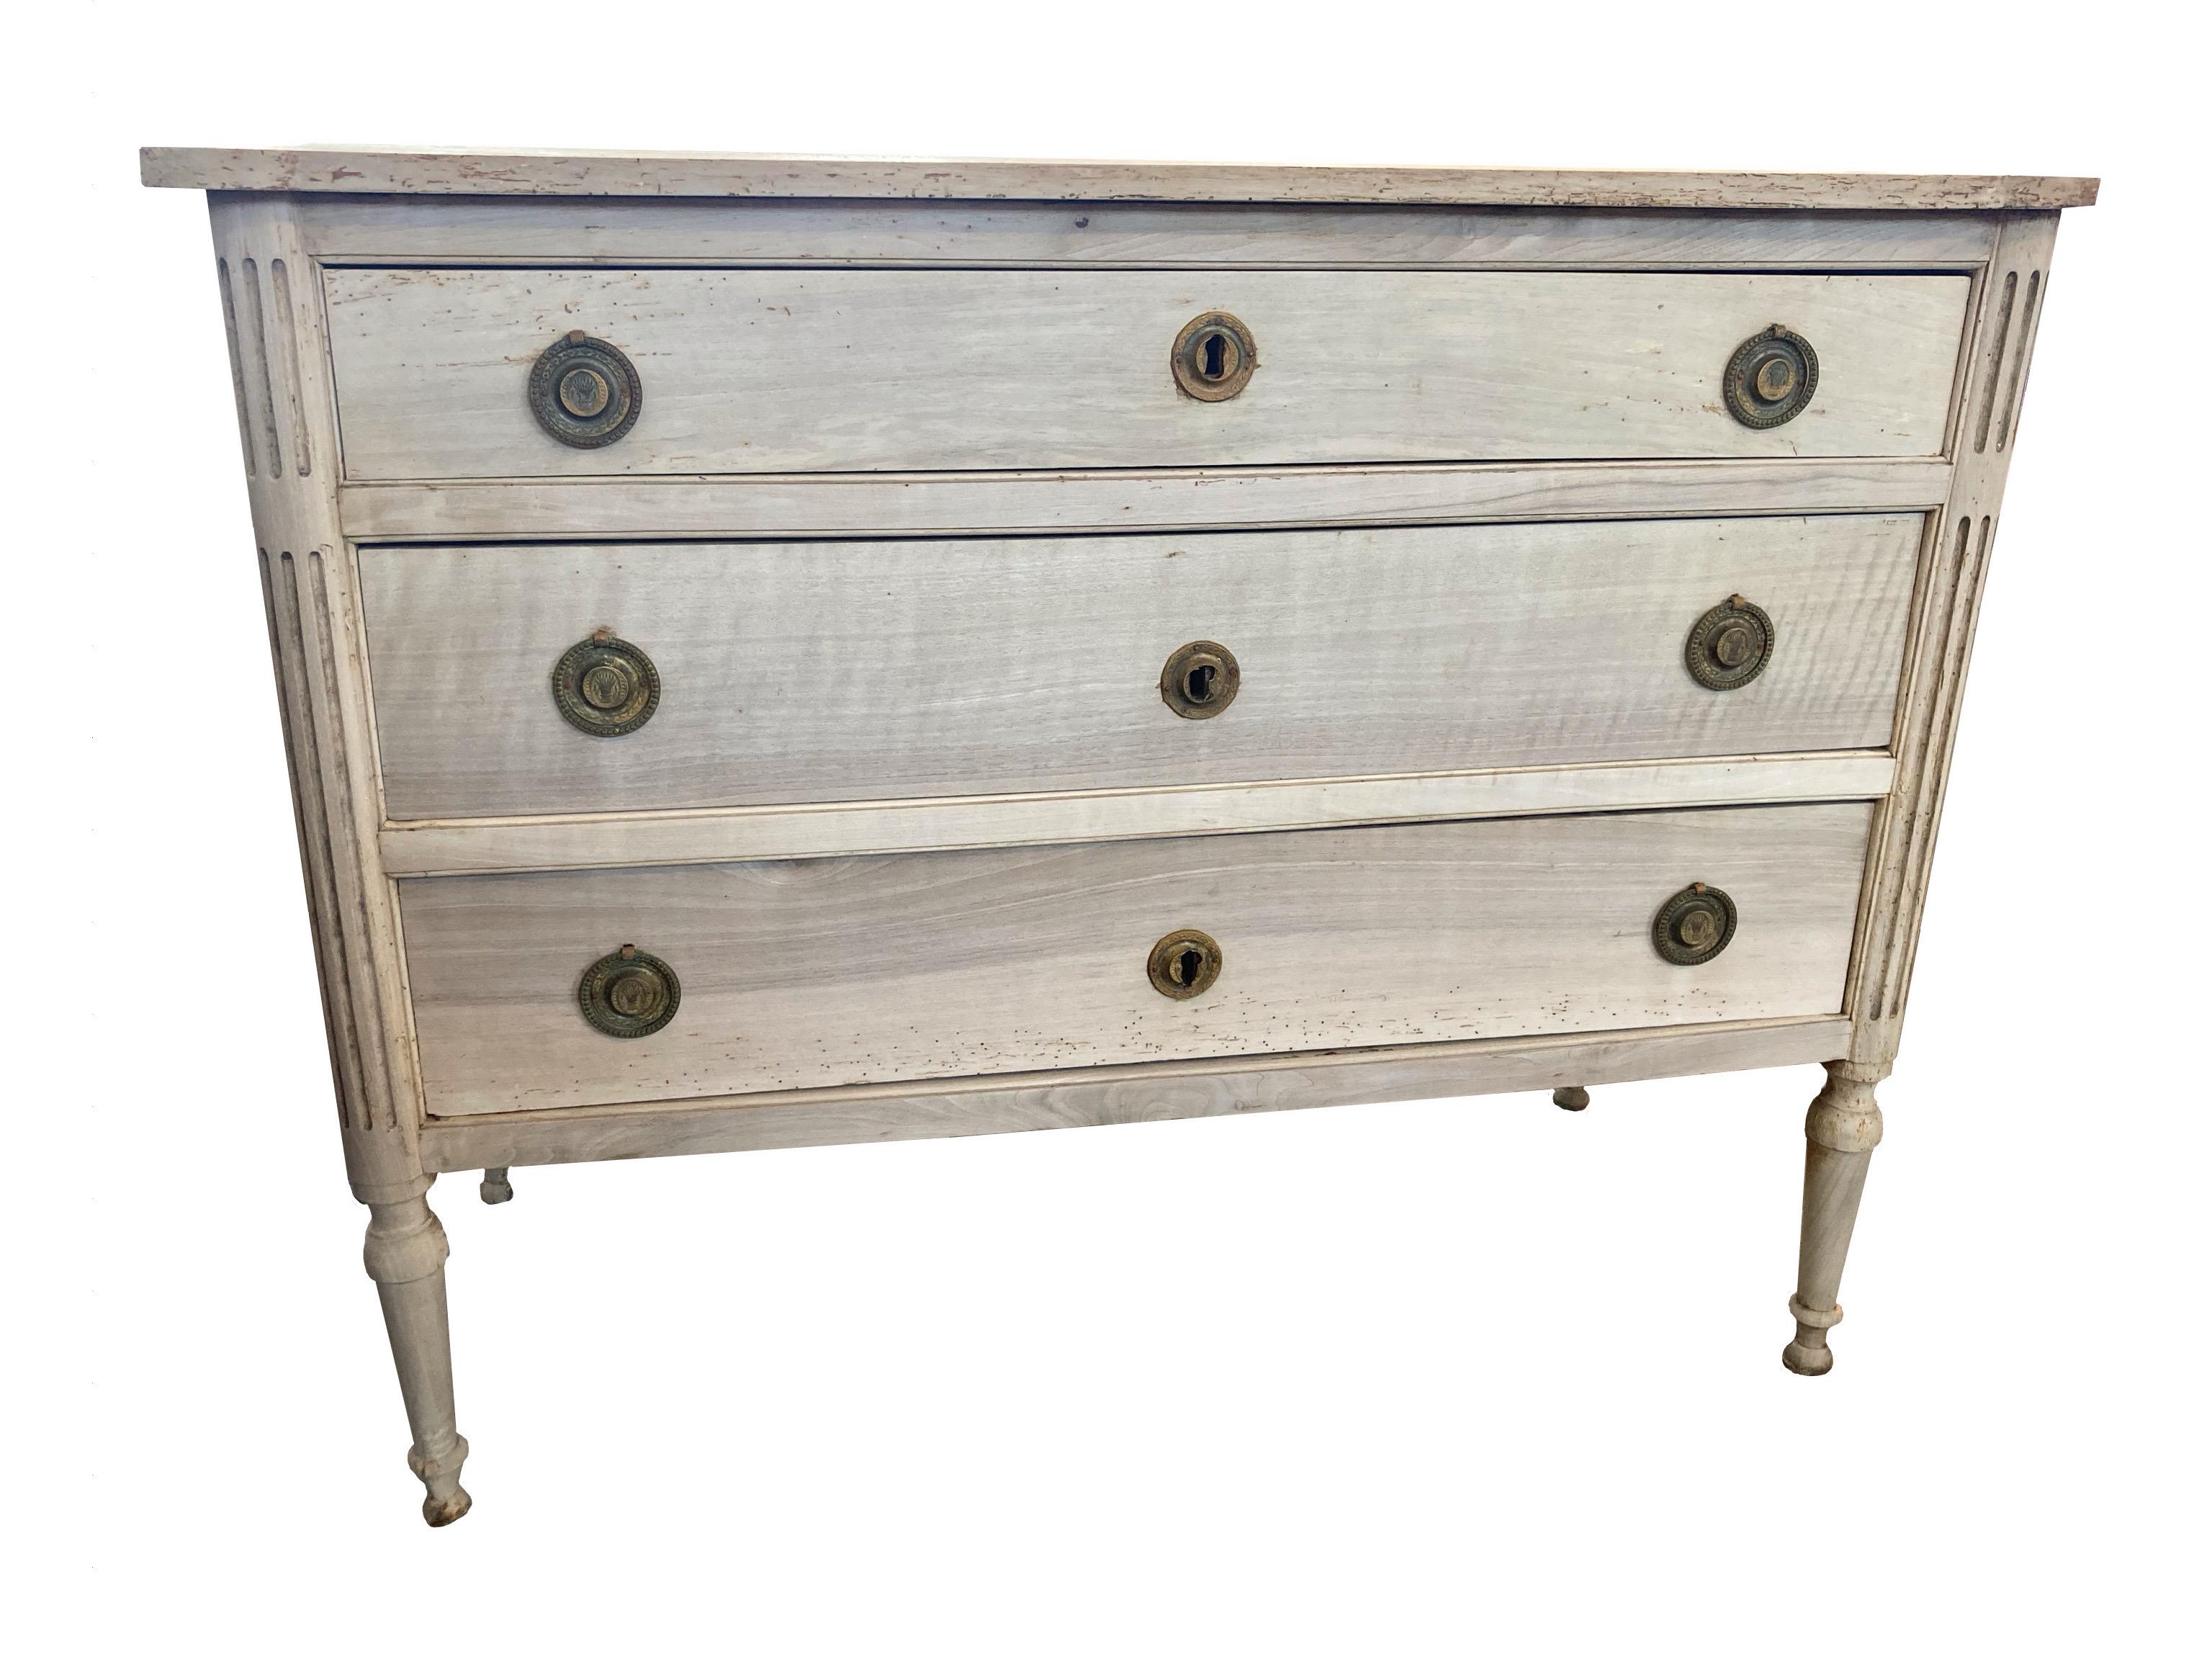 Louis xvi commode hand-made in North-West Italy in the late 1700s using walnut. The commode has beautiful lines and proportion and features three inset drawers, all showing beautiful hand-made dovetail joints. The front corners are decorated with